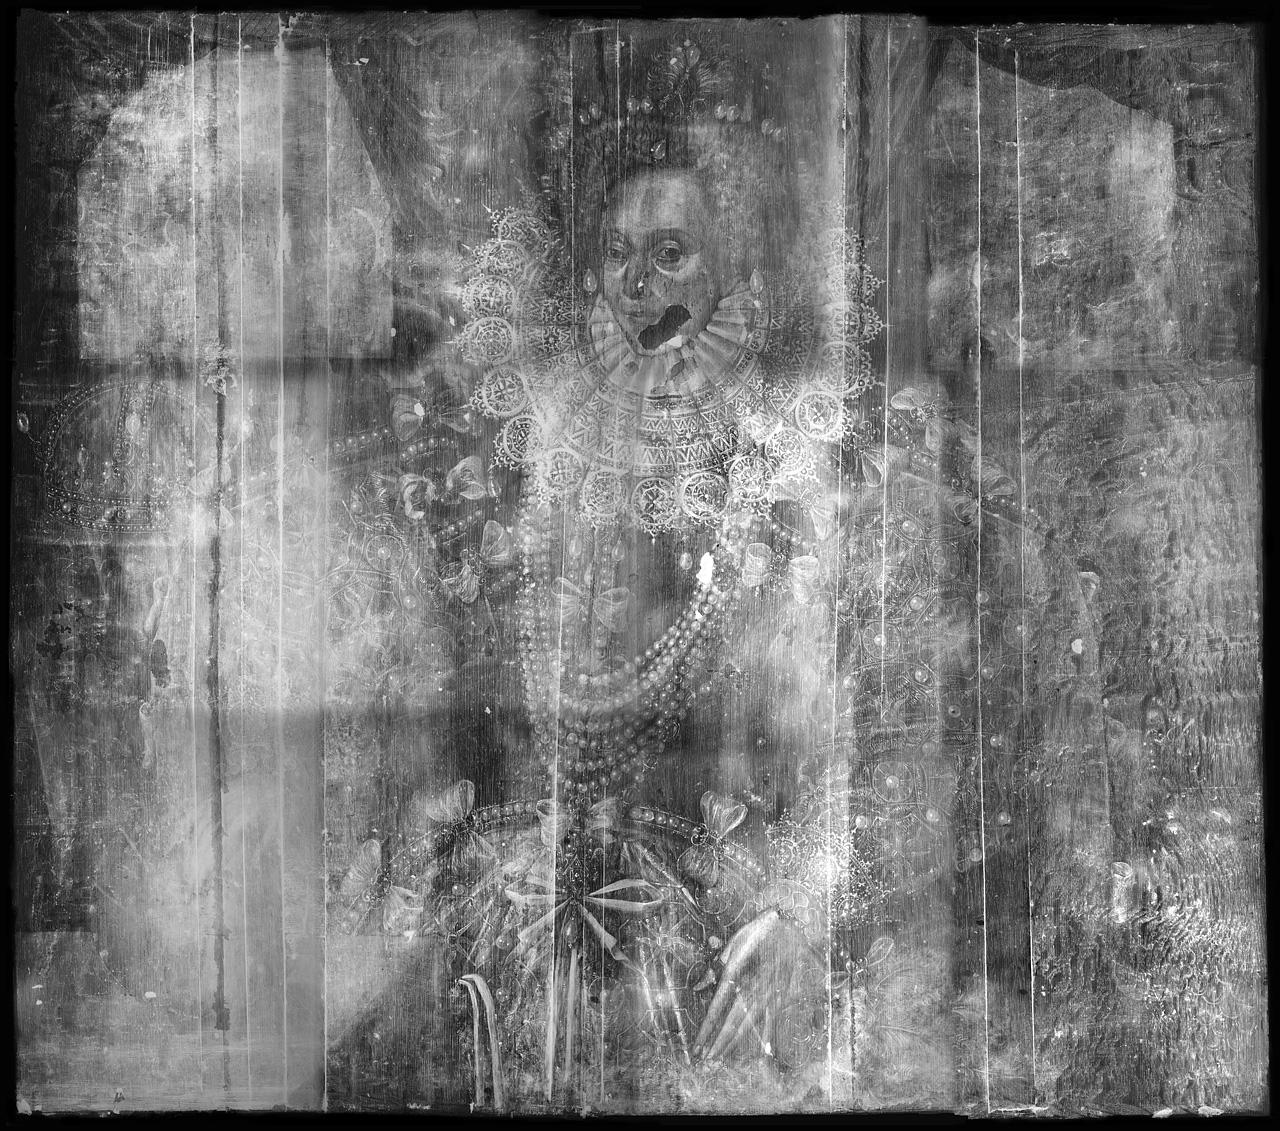 X-radiographs of the Armada portrait of Elizabeth I, showing the layers beneath the visible paint